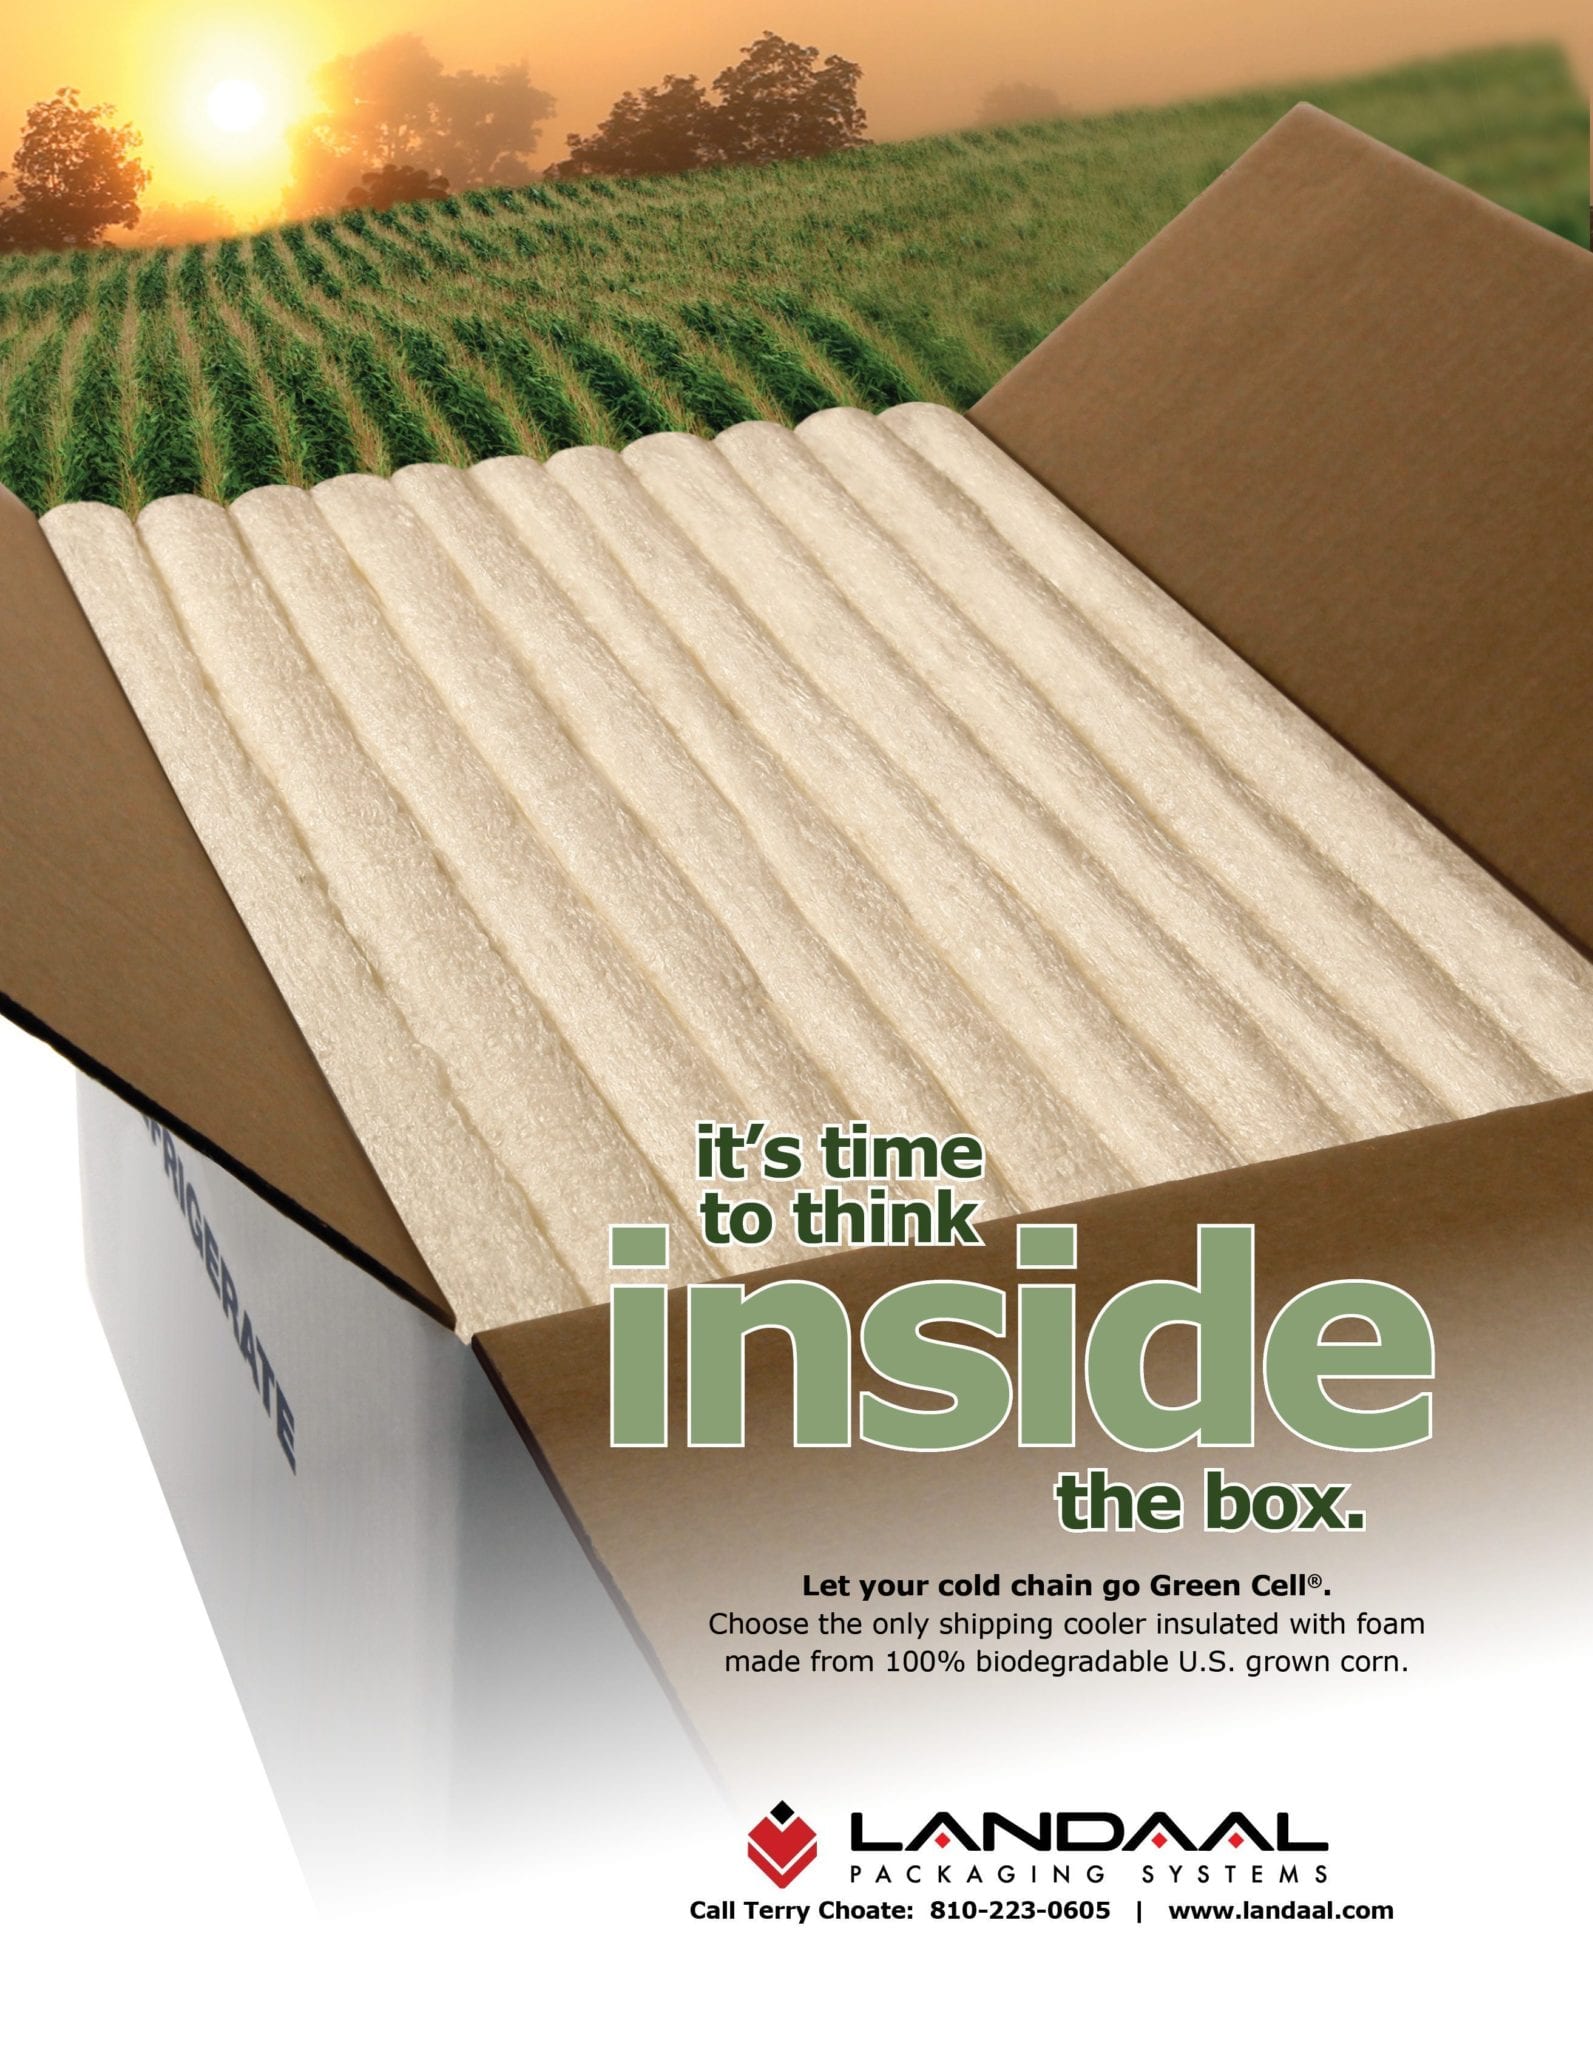 Sustainable Packaging, Green Packaging, Point Of Purchase Displays